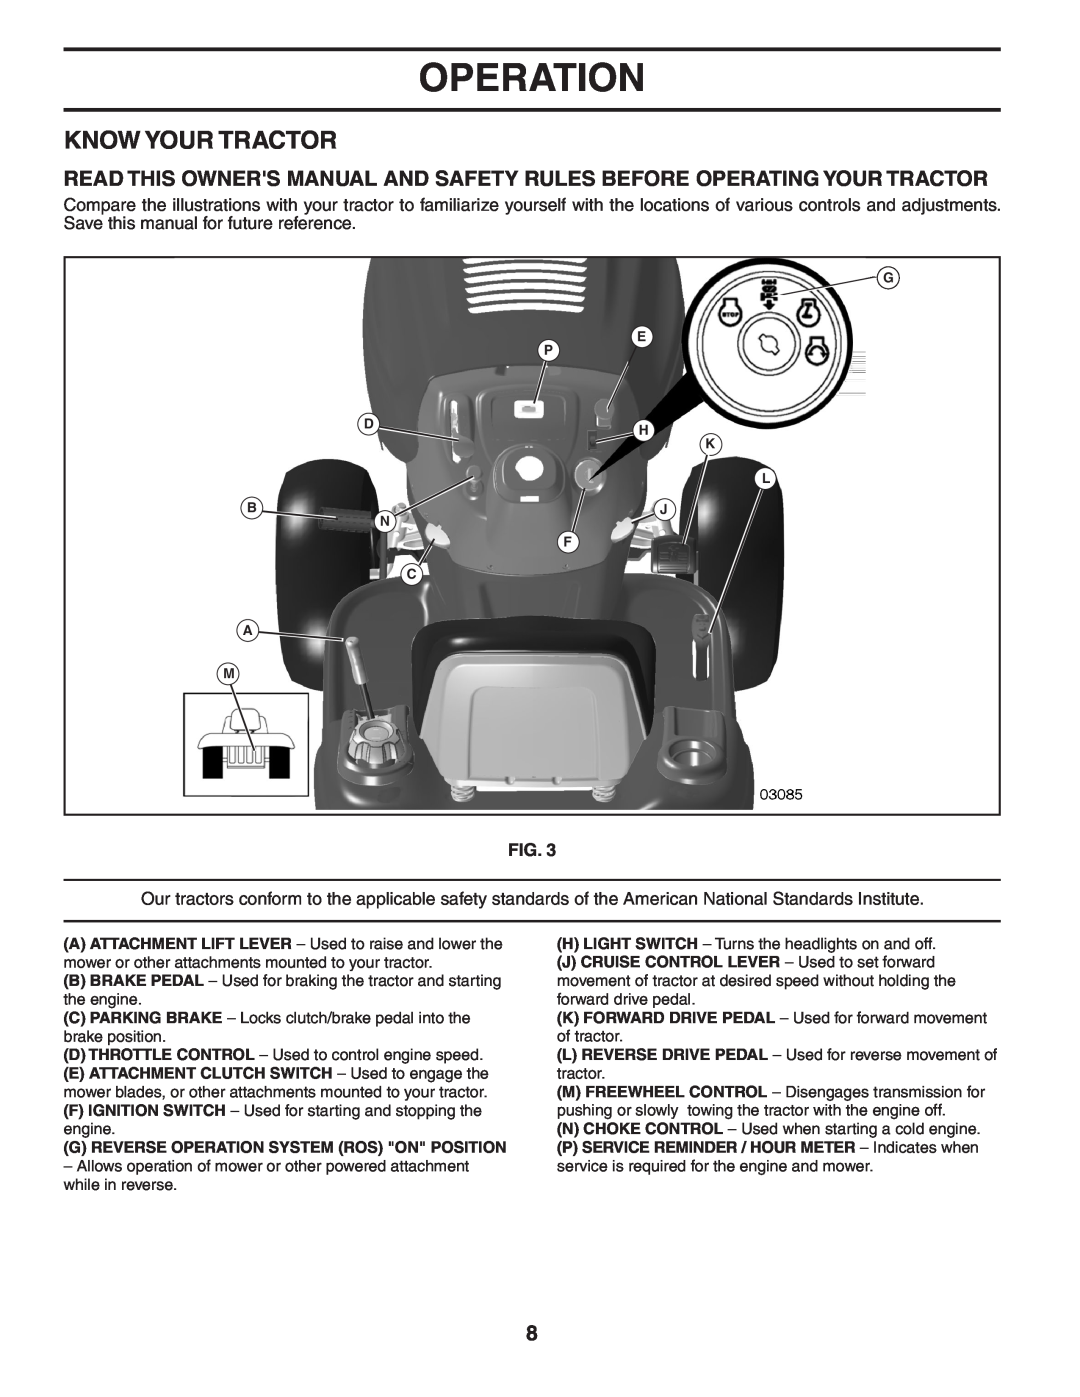 Poulan 404489 manual Know Your Tractor, G Reverse Operation System Ros On Position 